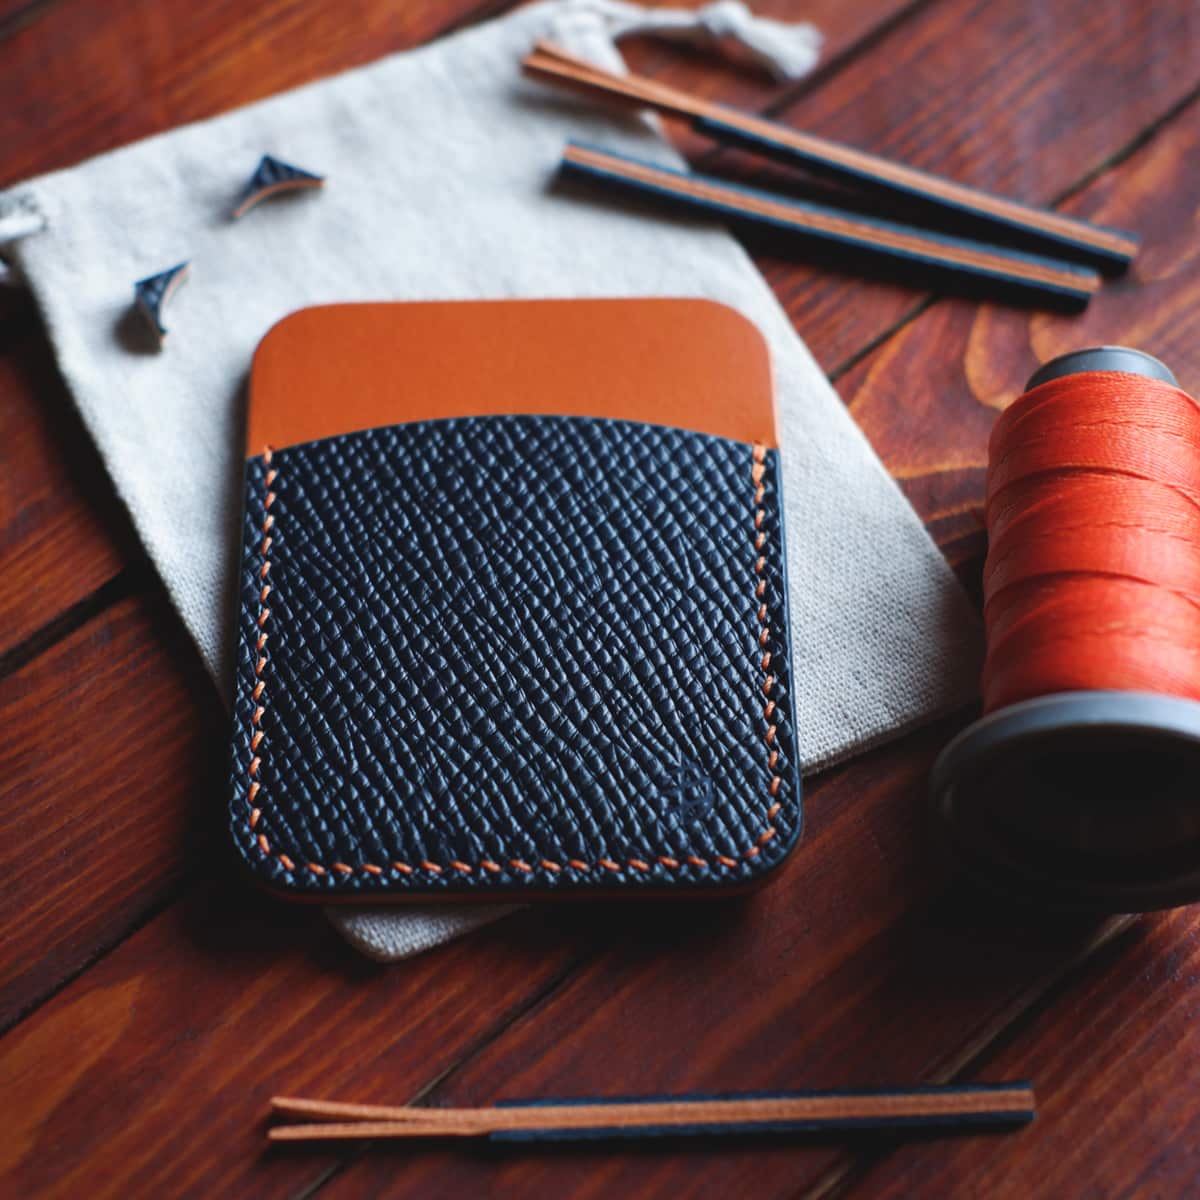 Tabletop view of The Palm Card Holder in Blue Buttero Hatch and Orange Koala vegetable tanned leathers